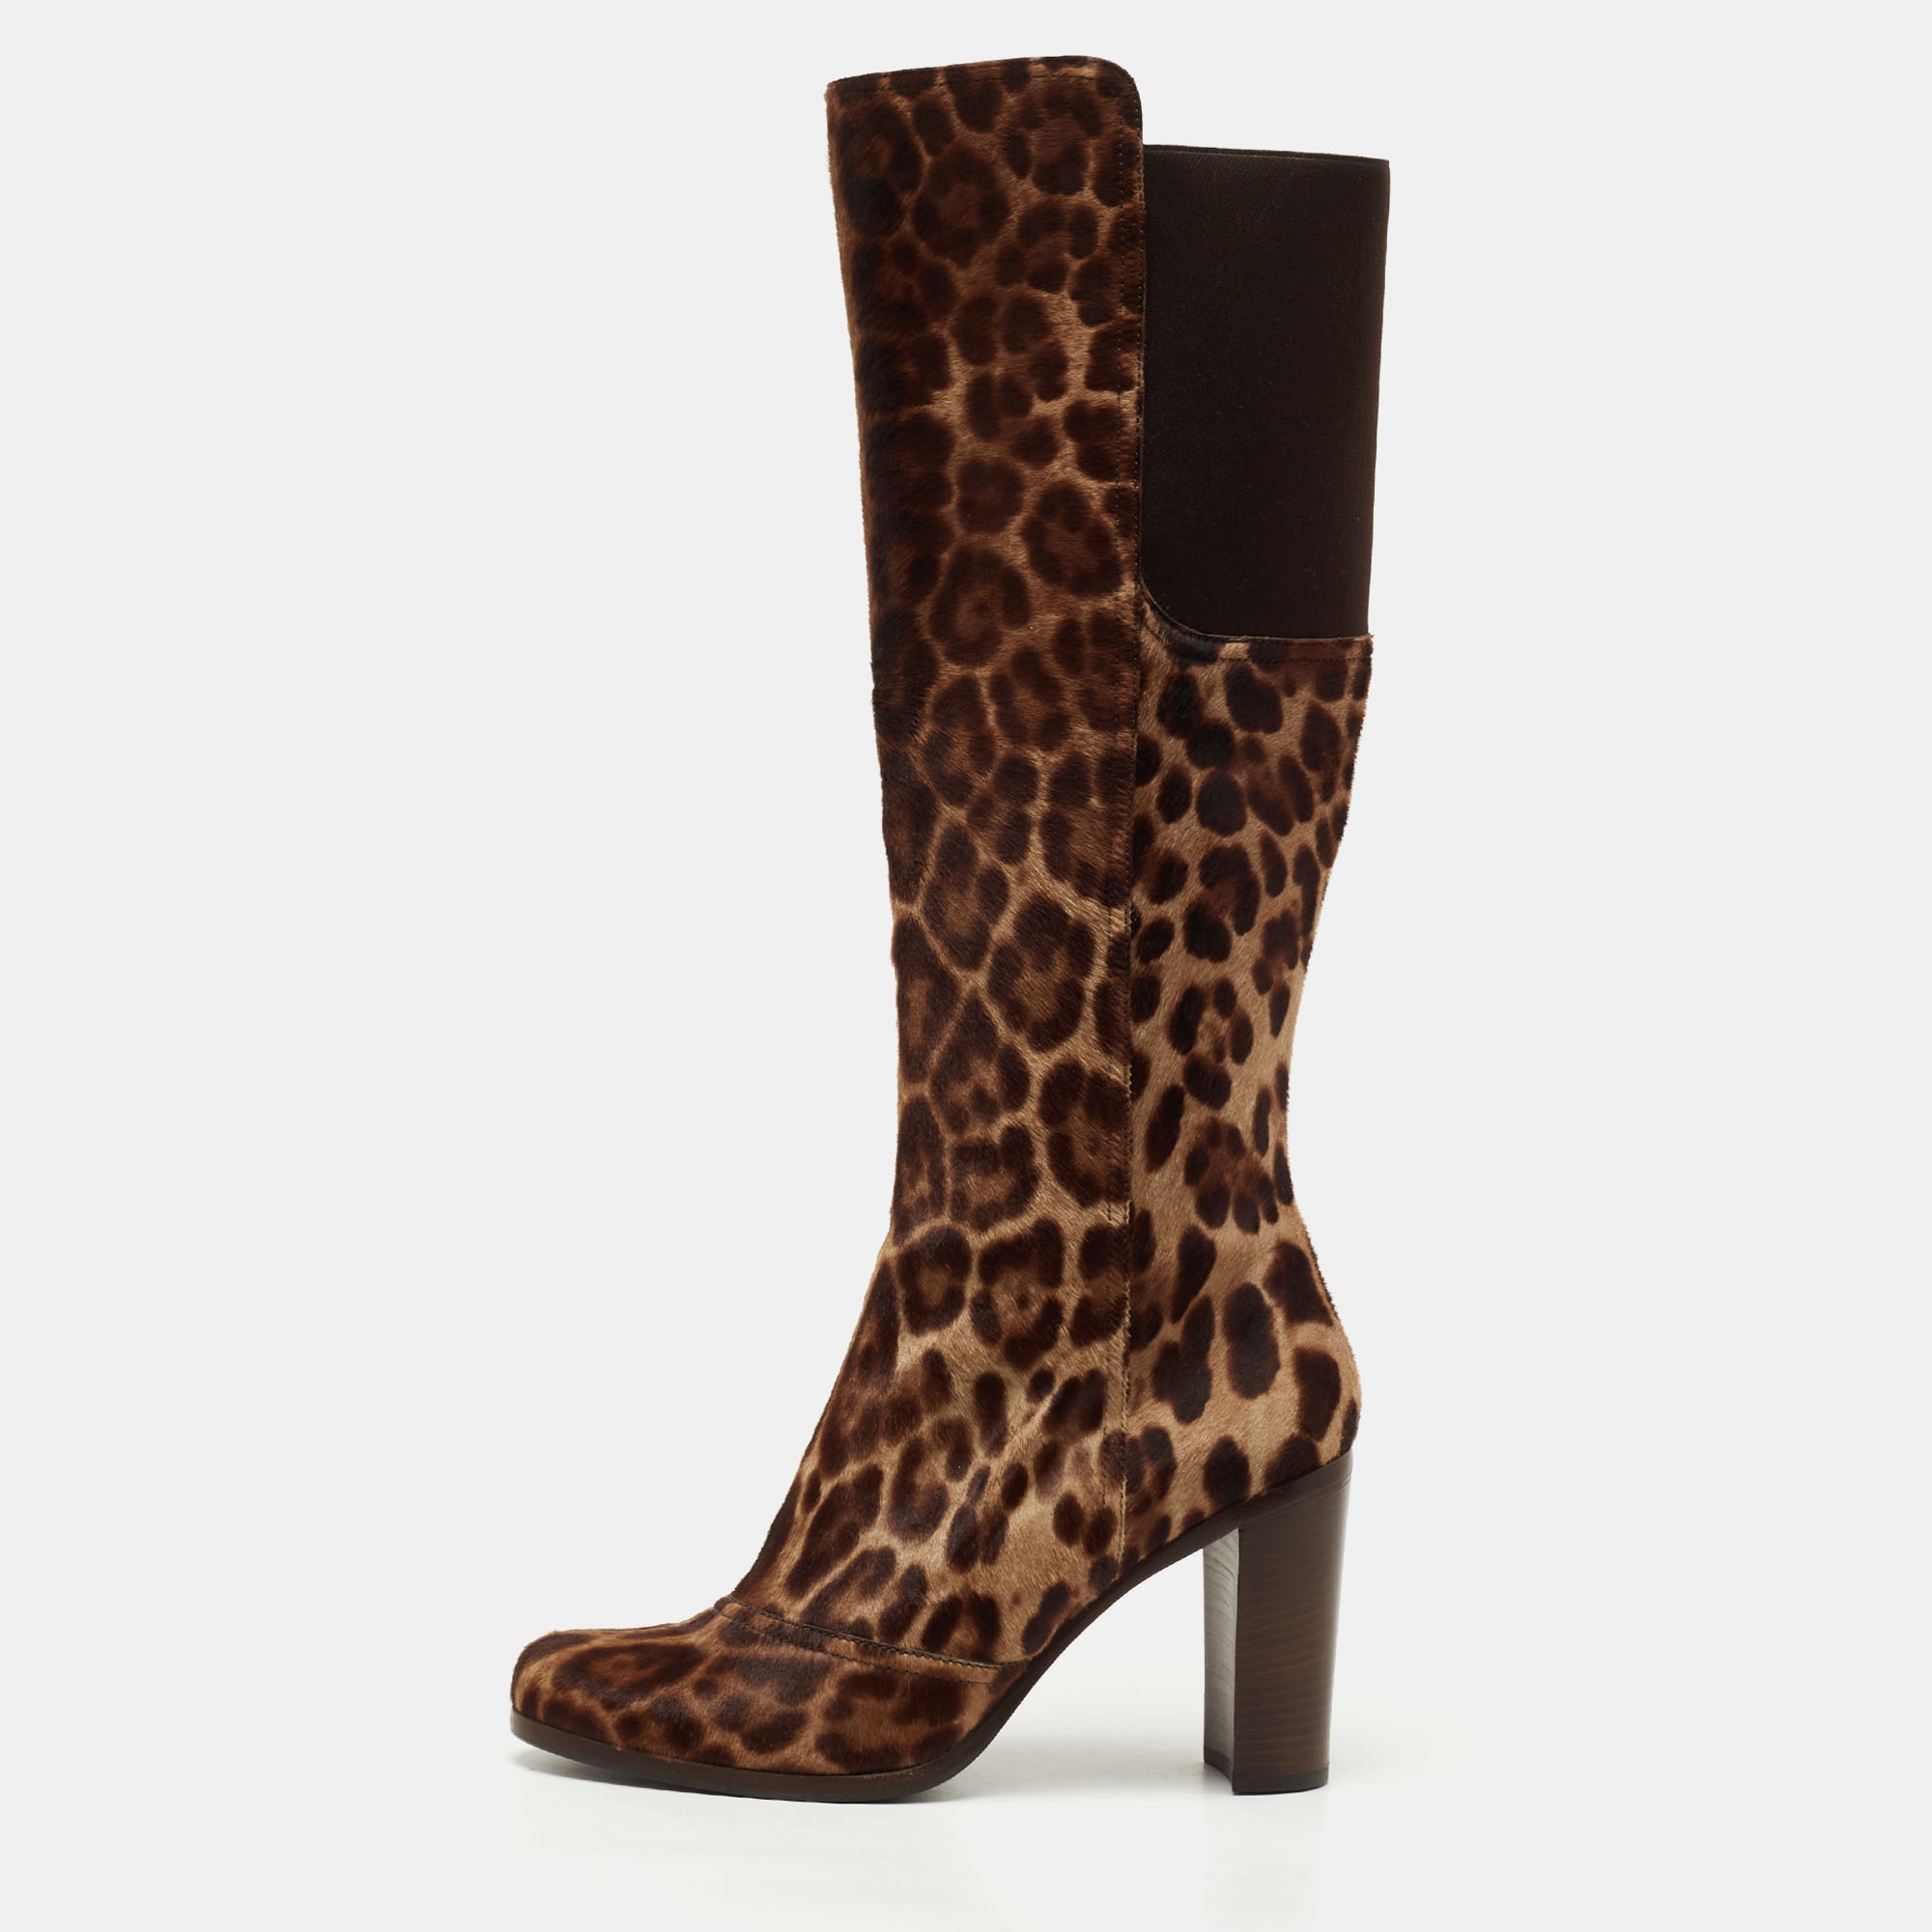 Dolce & gabbana brown leopard print suede knee length boots size 40